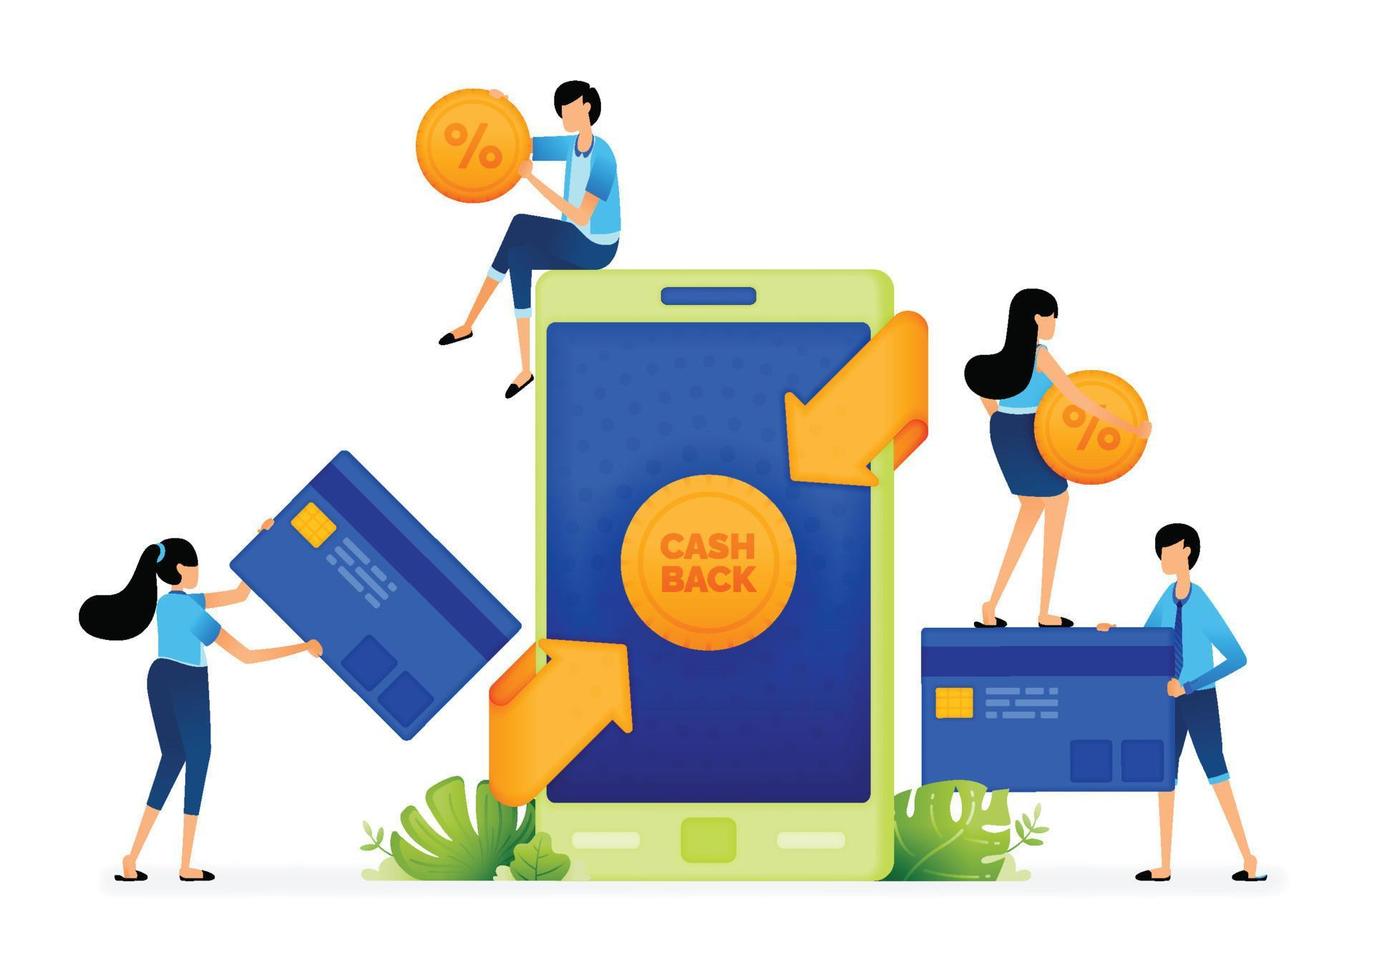 Vector illustration of Cashback earned for connecting credit cards with digital financial transactions apps. Can be used for landing pages, web, websites, mobile apps, posters, ads, flyers, banners